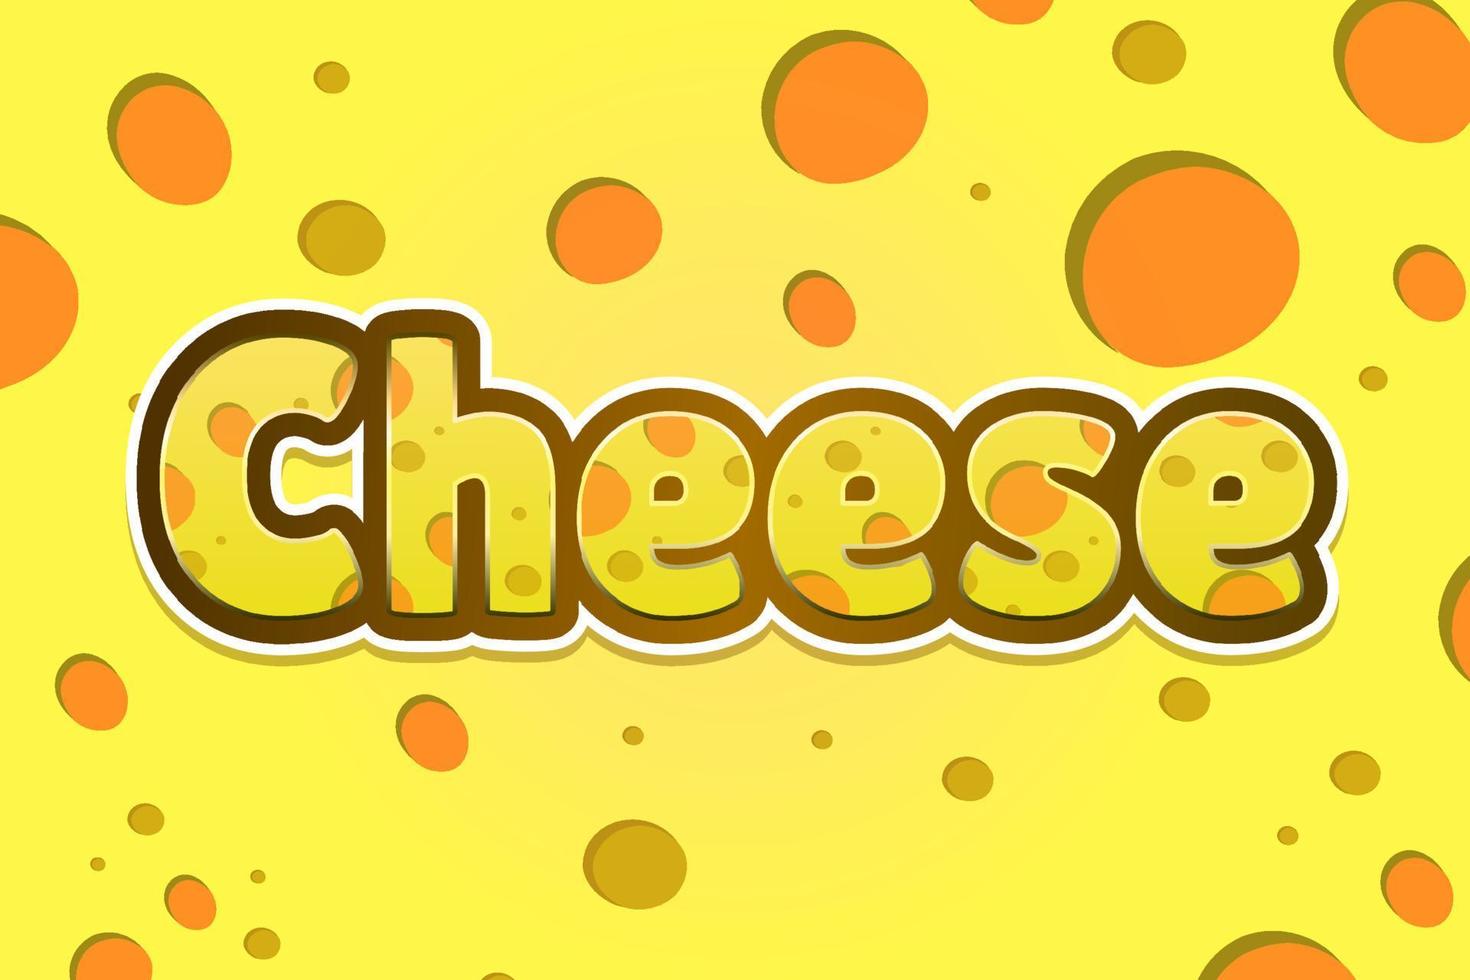 Oh! That's cheesy!